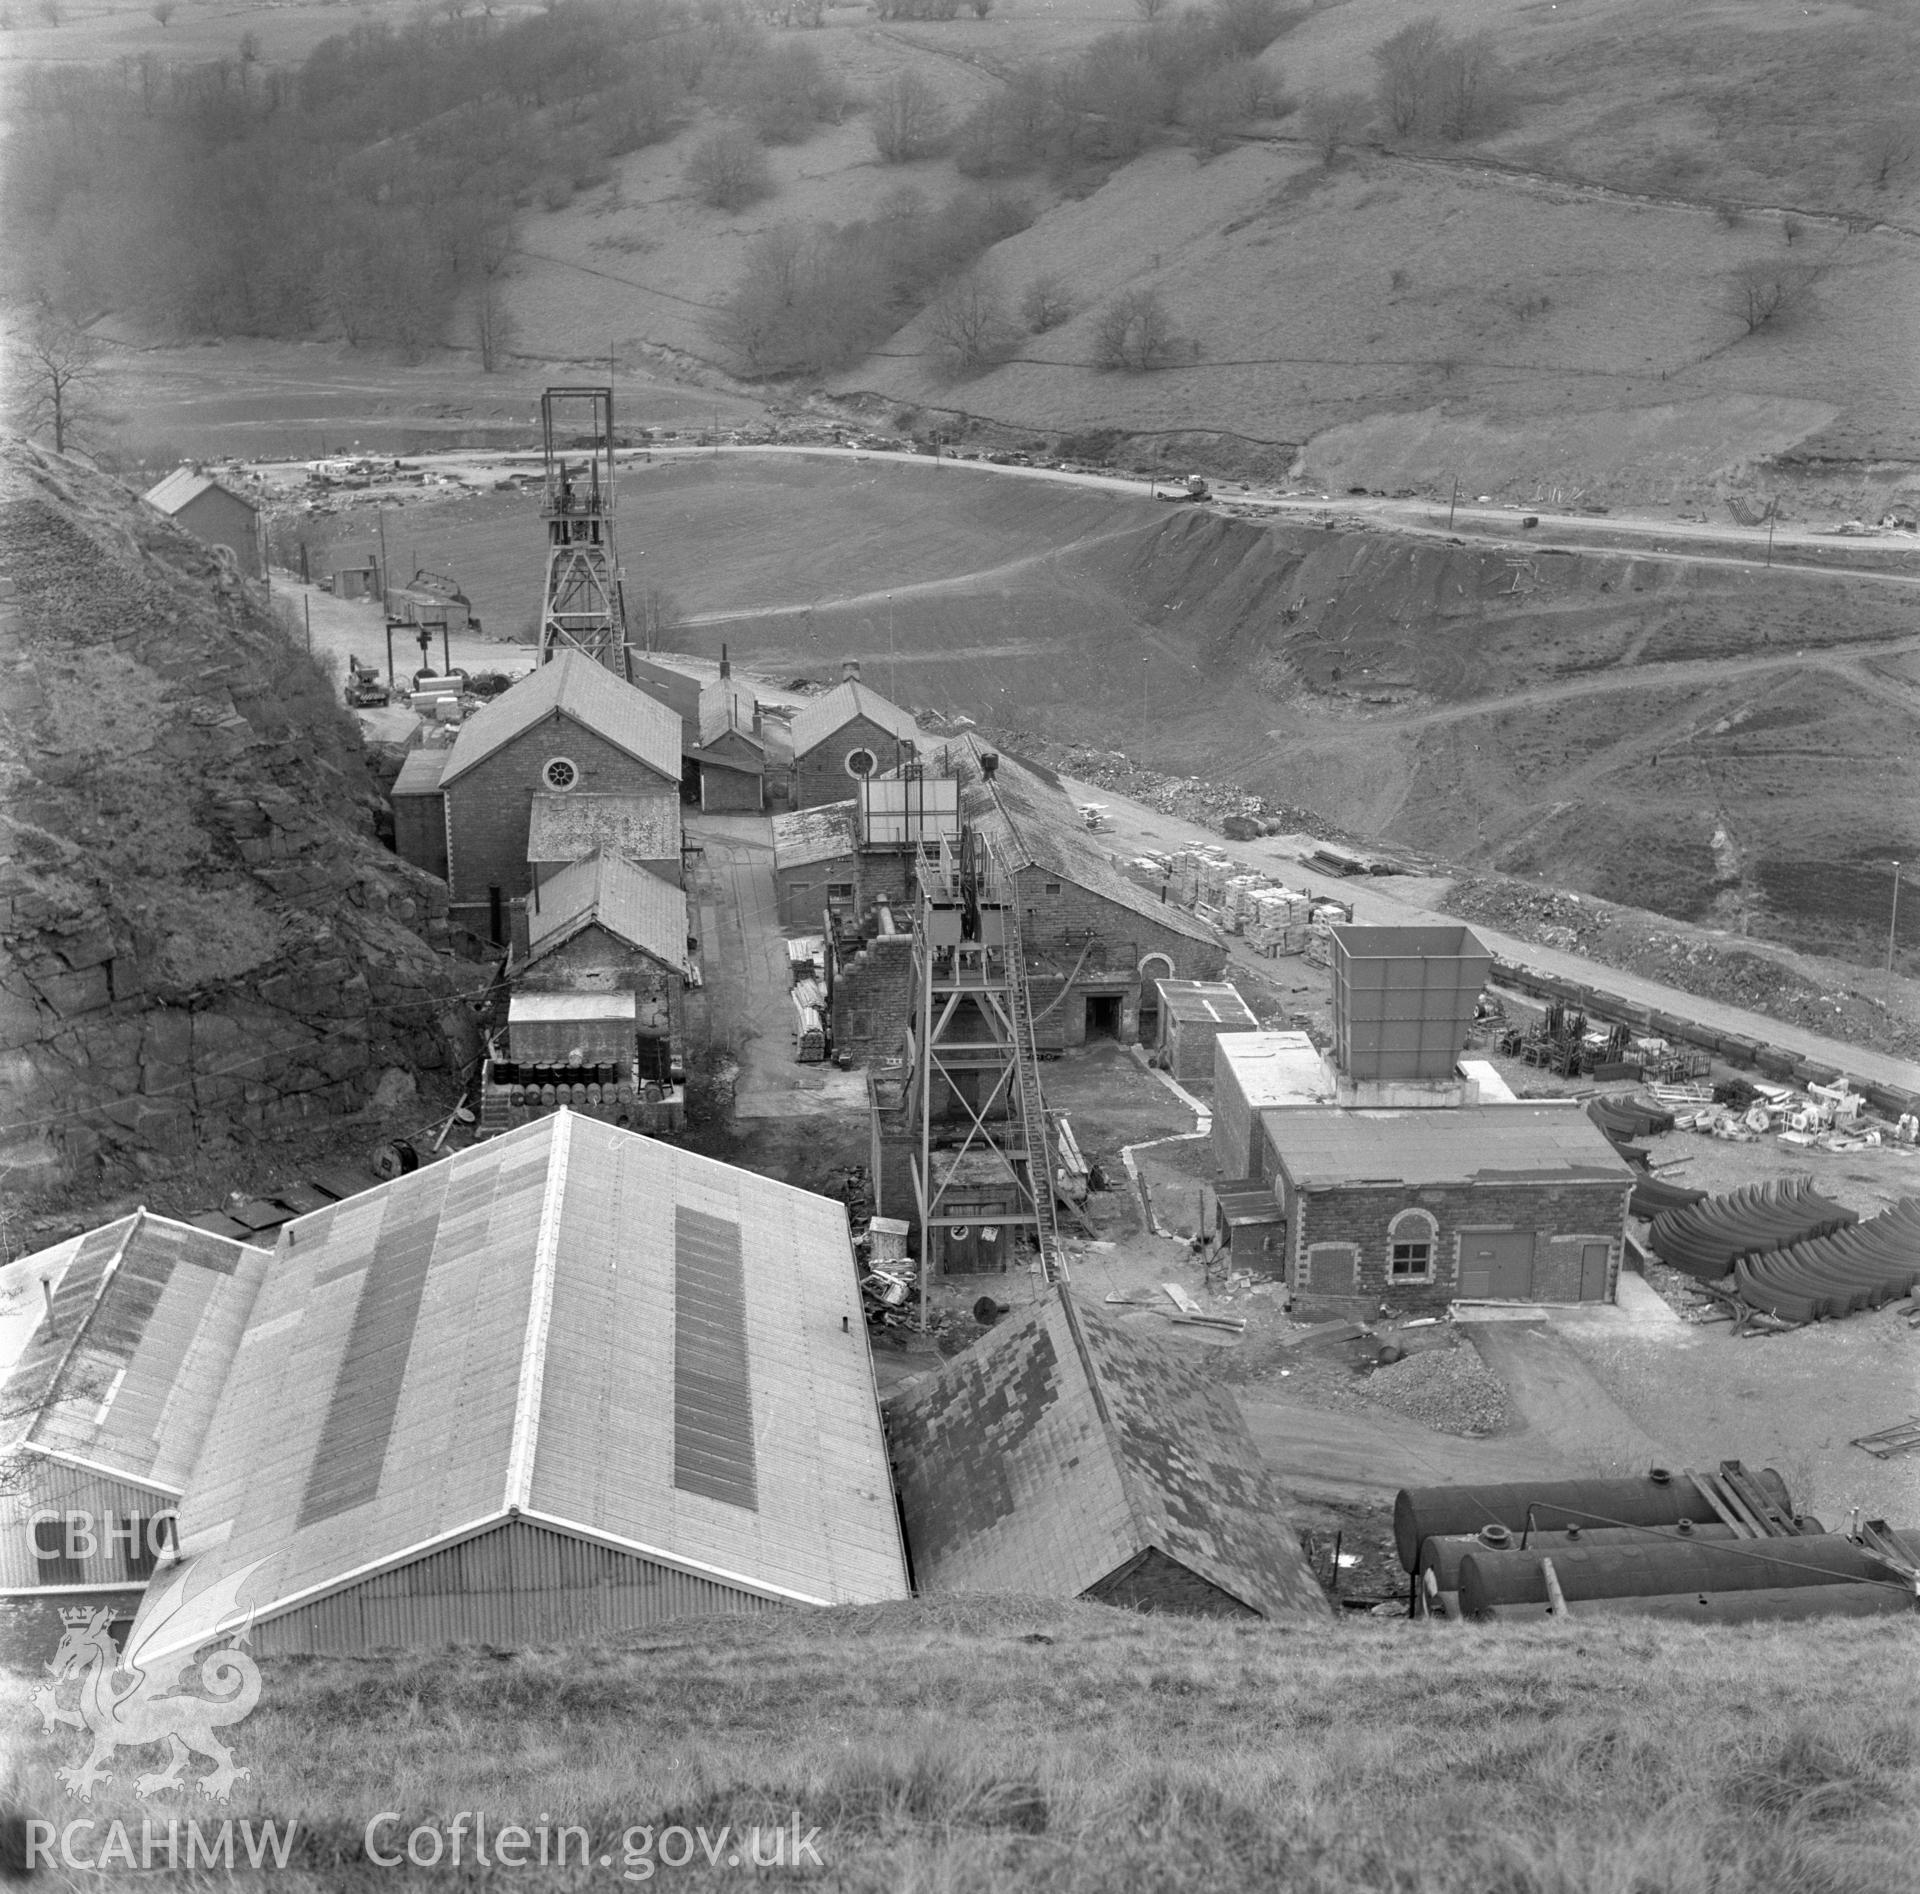 Digital copy of an acetate negative showing general view of Blaenserchan Colliery after reconstruction, from the John Cornwell Collection.